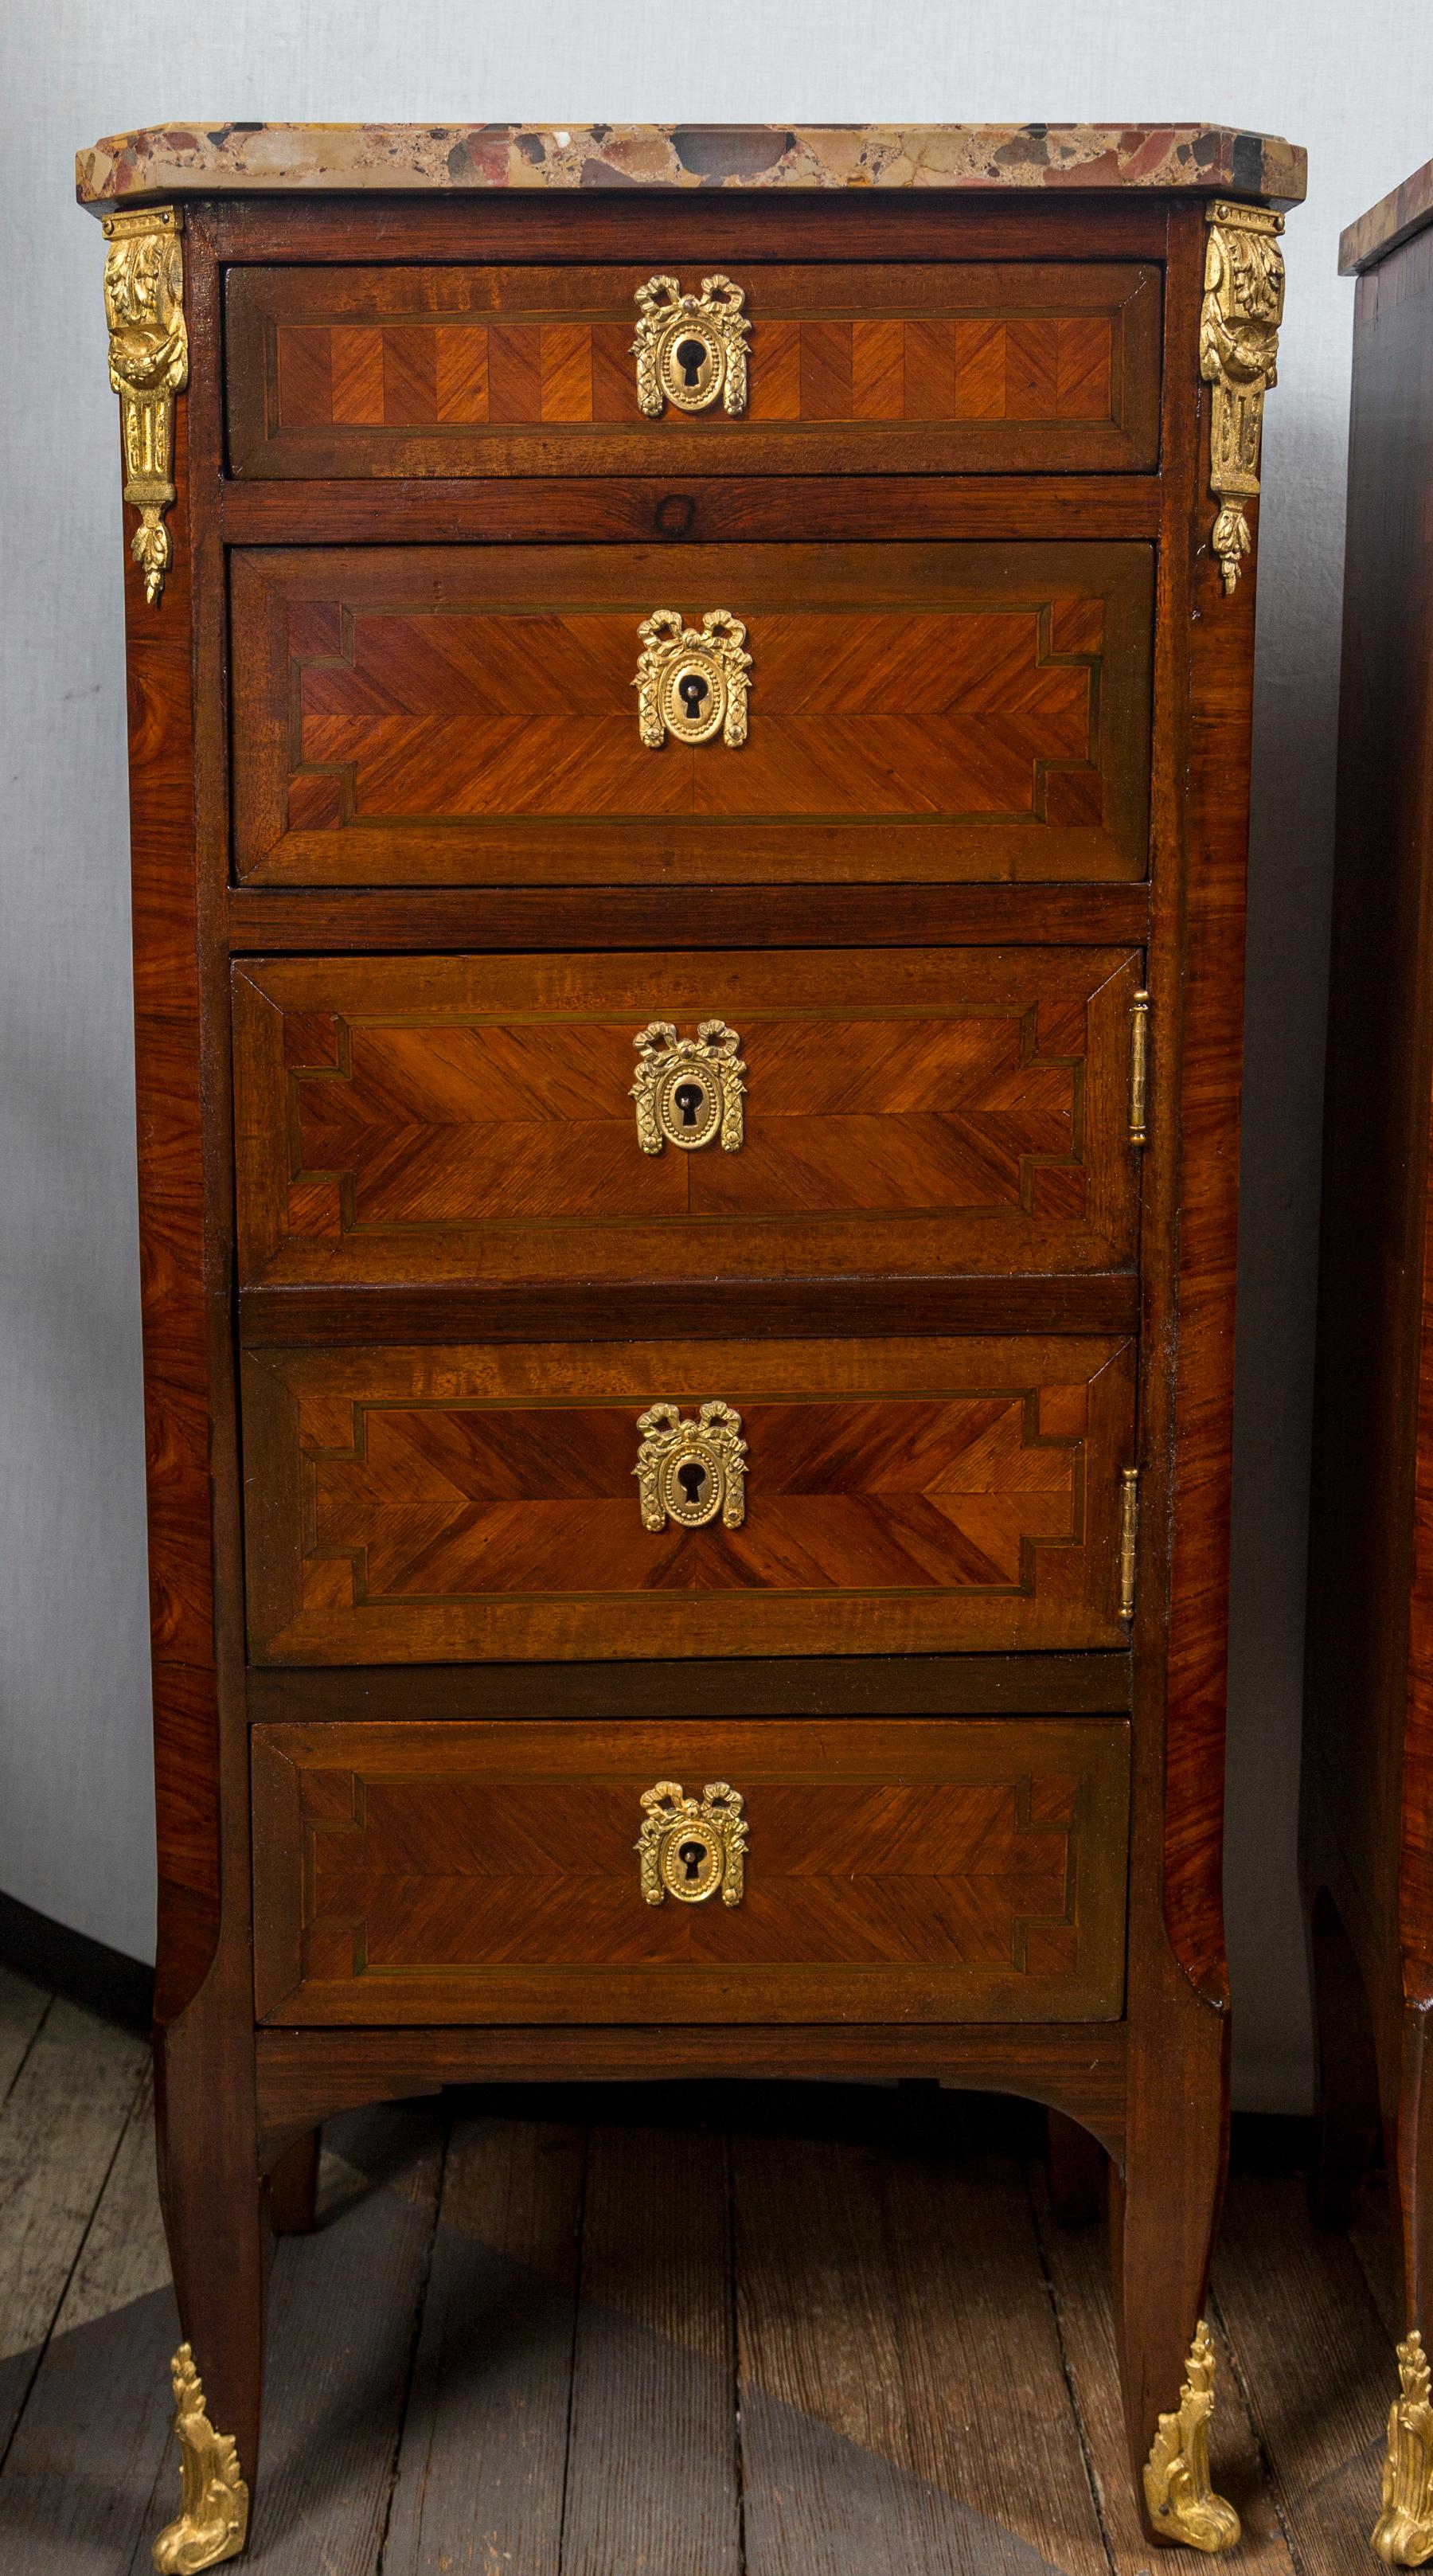 In the transitional French style with parquetry veneers, gilt bronze escutcheons, top corner mounts and sabots. Three drawers that open and a cabinet with faux draw fronts, on one. (hinged right side), the other having 5 drawers
I can provide a key